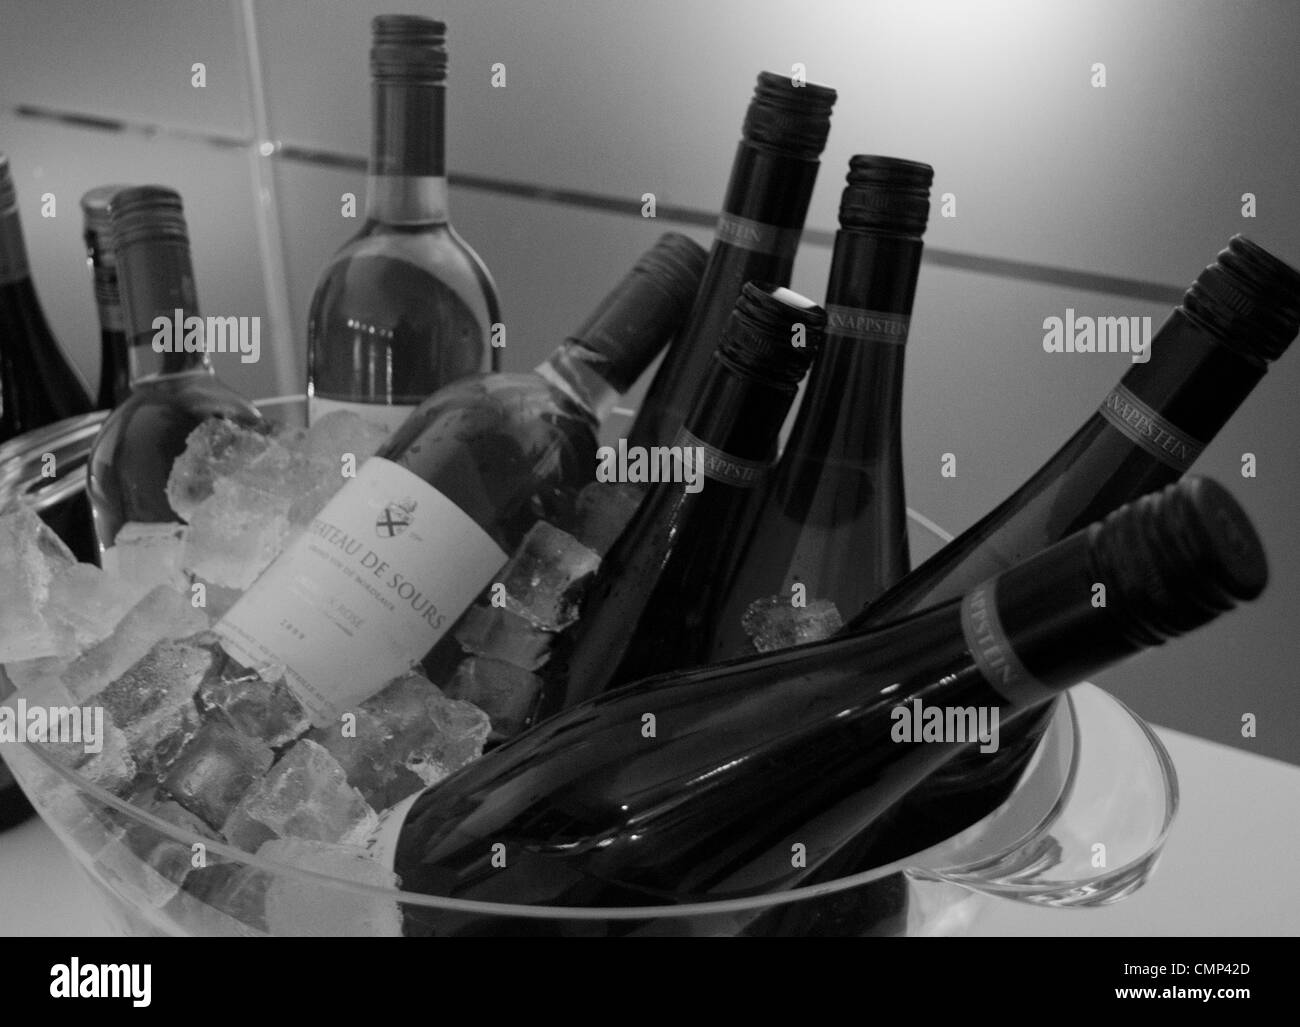 Bottles of wine chilling over ice. Stock Photo